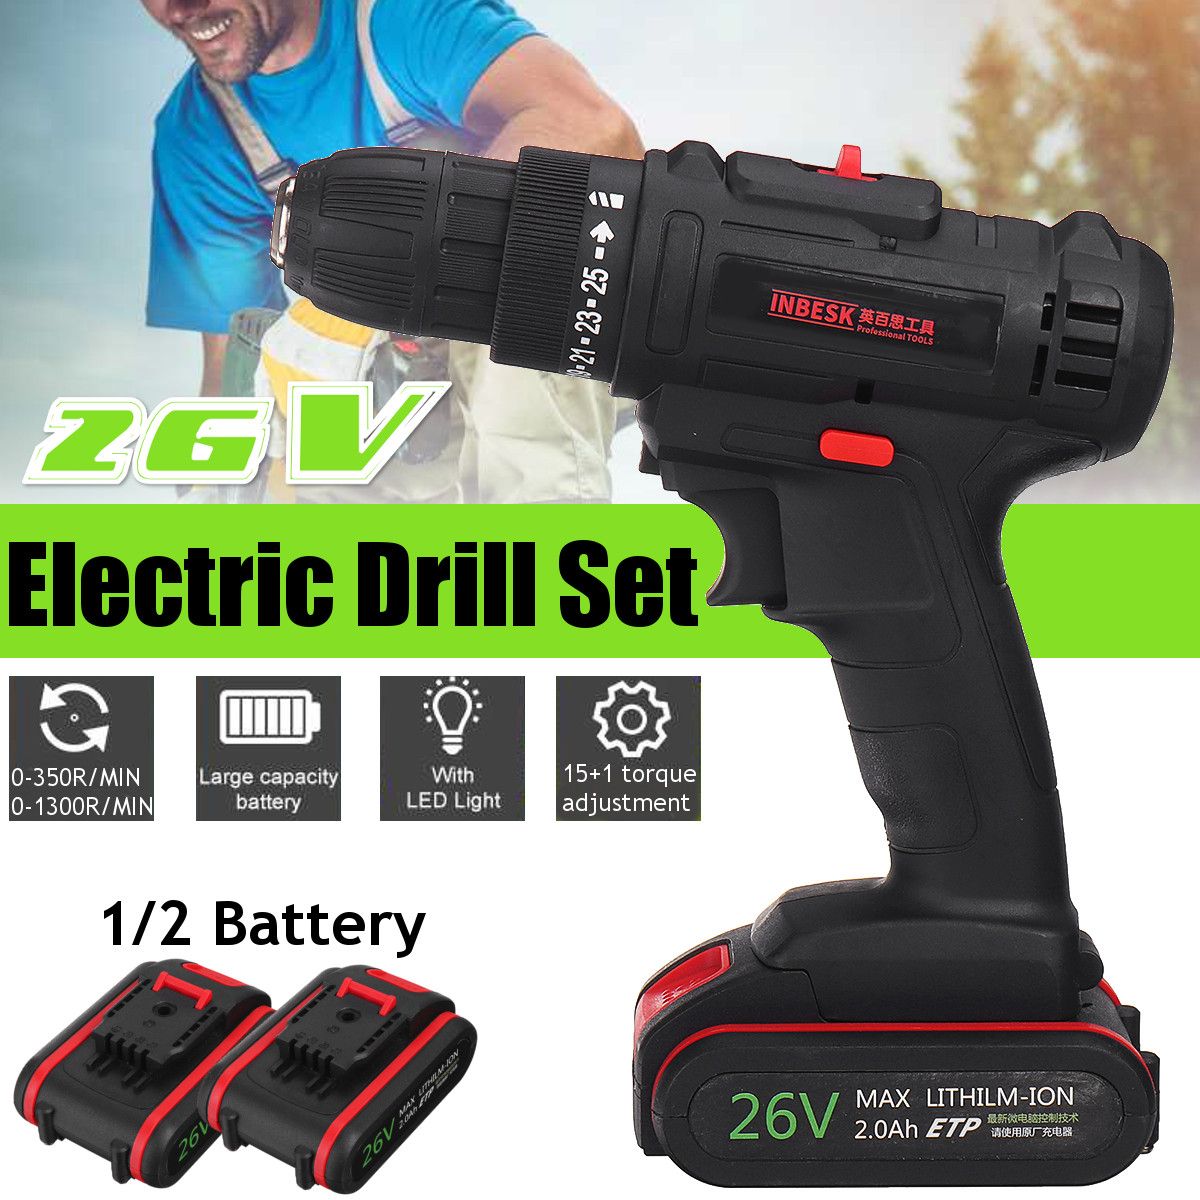 26V-Electric-Cordless-Drill-Driver-Power-Drill-2-Speed-With-LED-Light-1754358